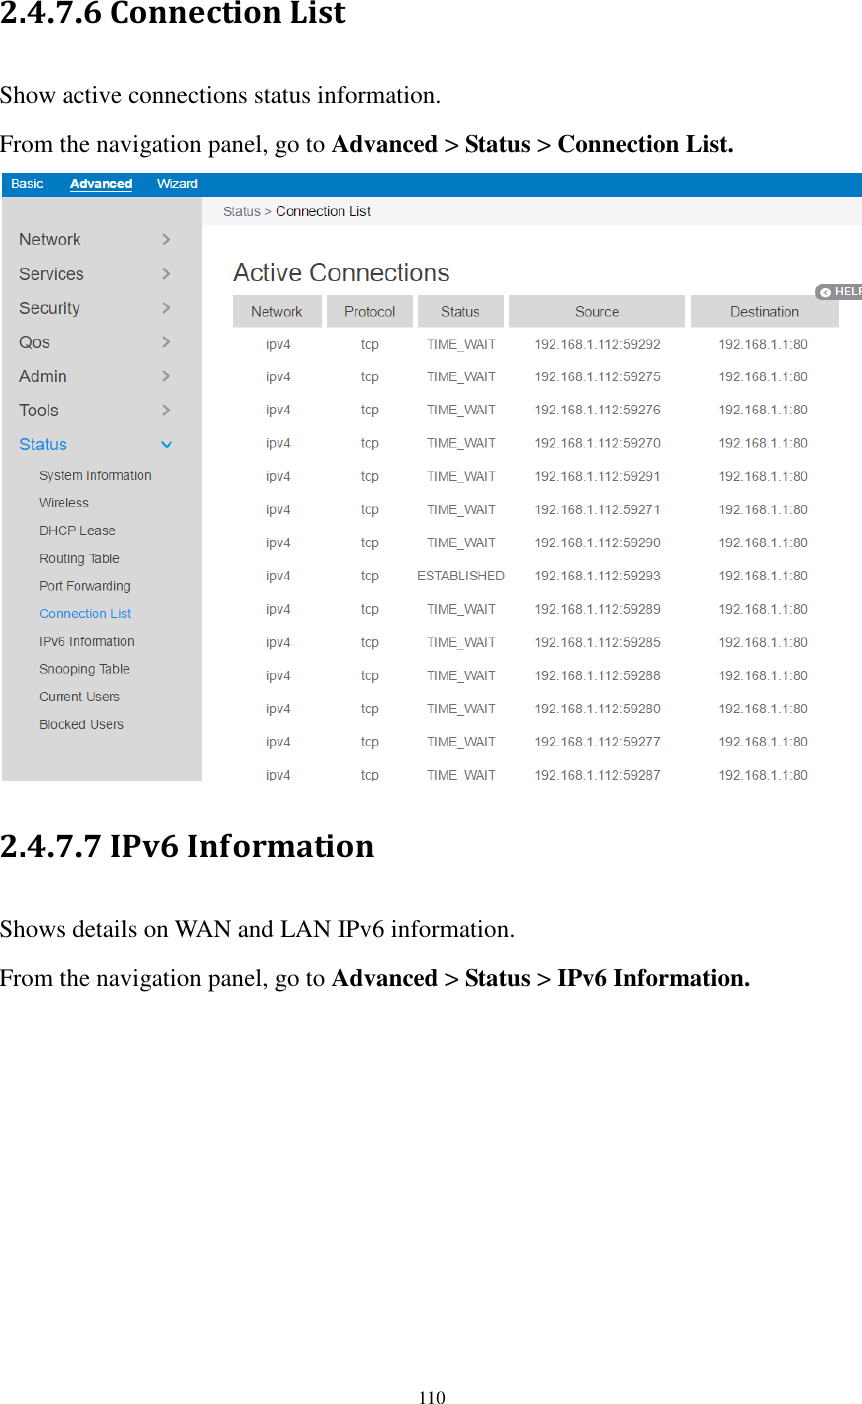  110  2.4.7.6 Connection List Show active connections status information. From the navigation panel, go to Advanced &gt; Status &gt; Connection List.  2.4.7.7 IPv6 Information Shows details on WAN and LAN IPv6 information. From the navigation panel, go to Advanced &gt; Status &gt; IPv6 Information. 